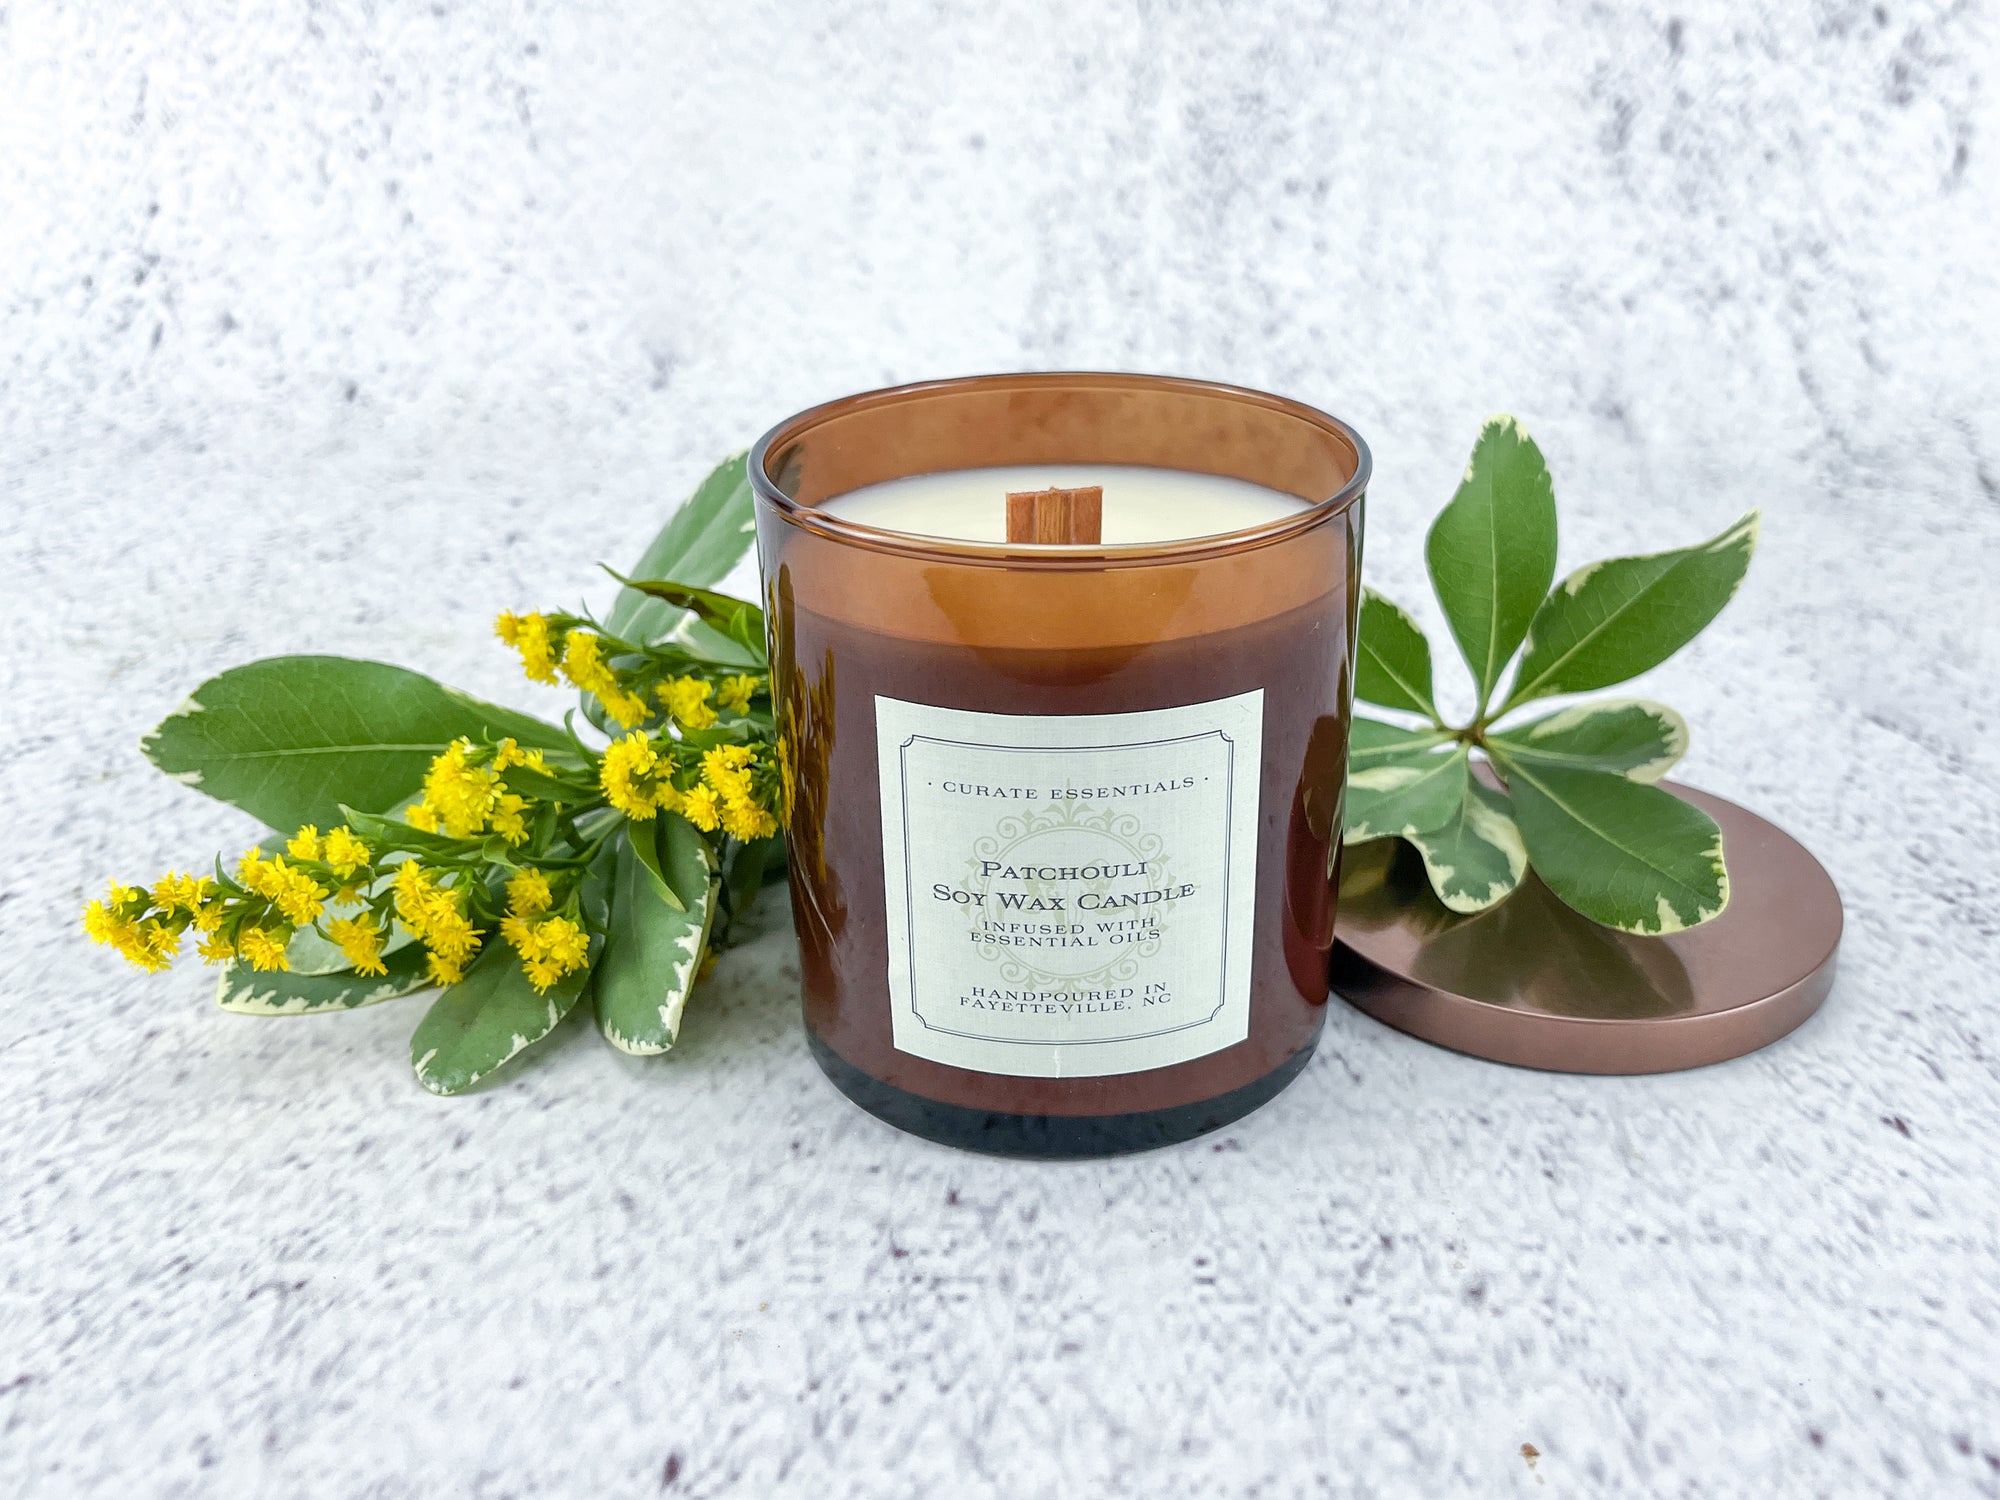 Patchouli and Hemp Soy Wax Candle